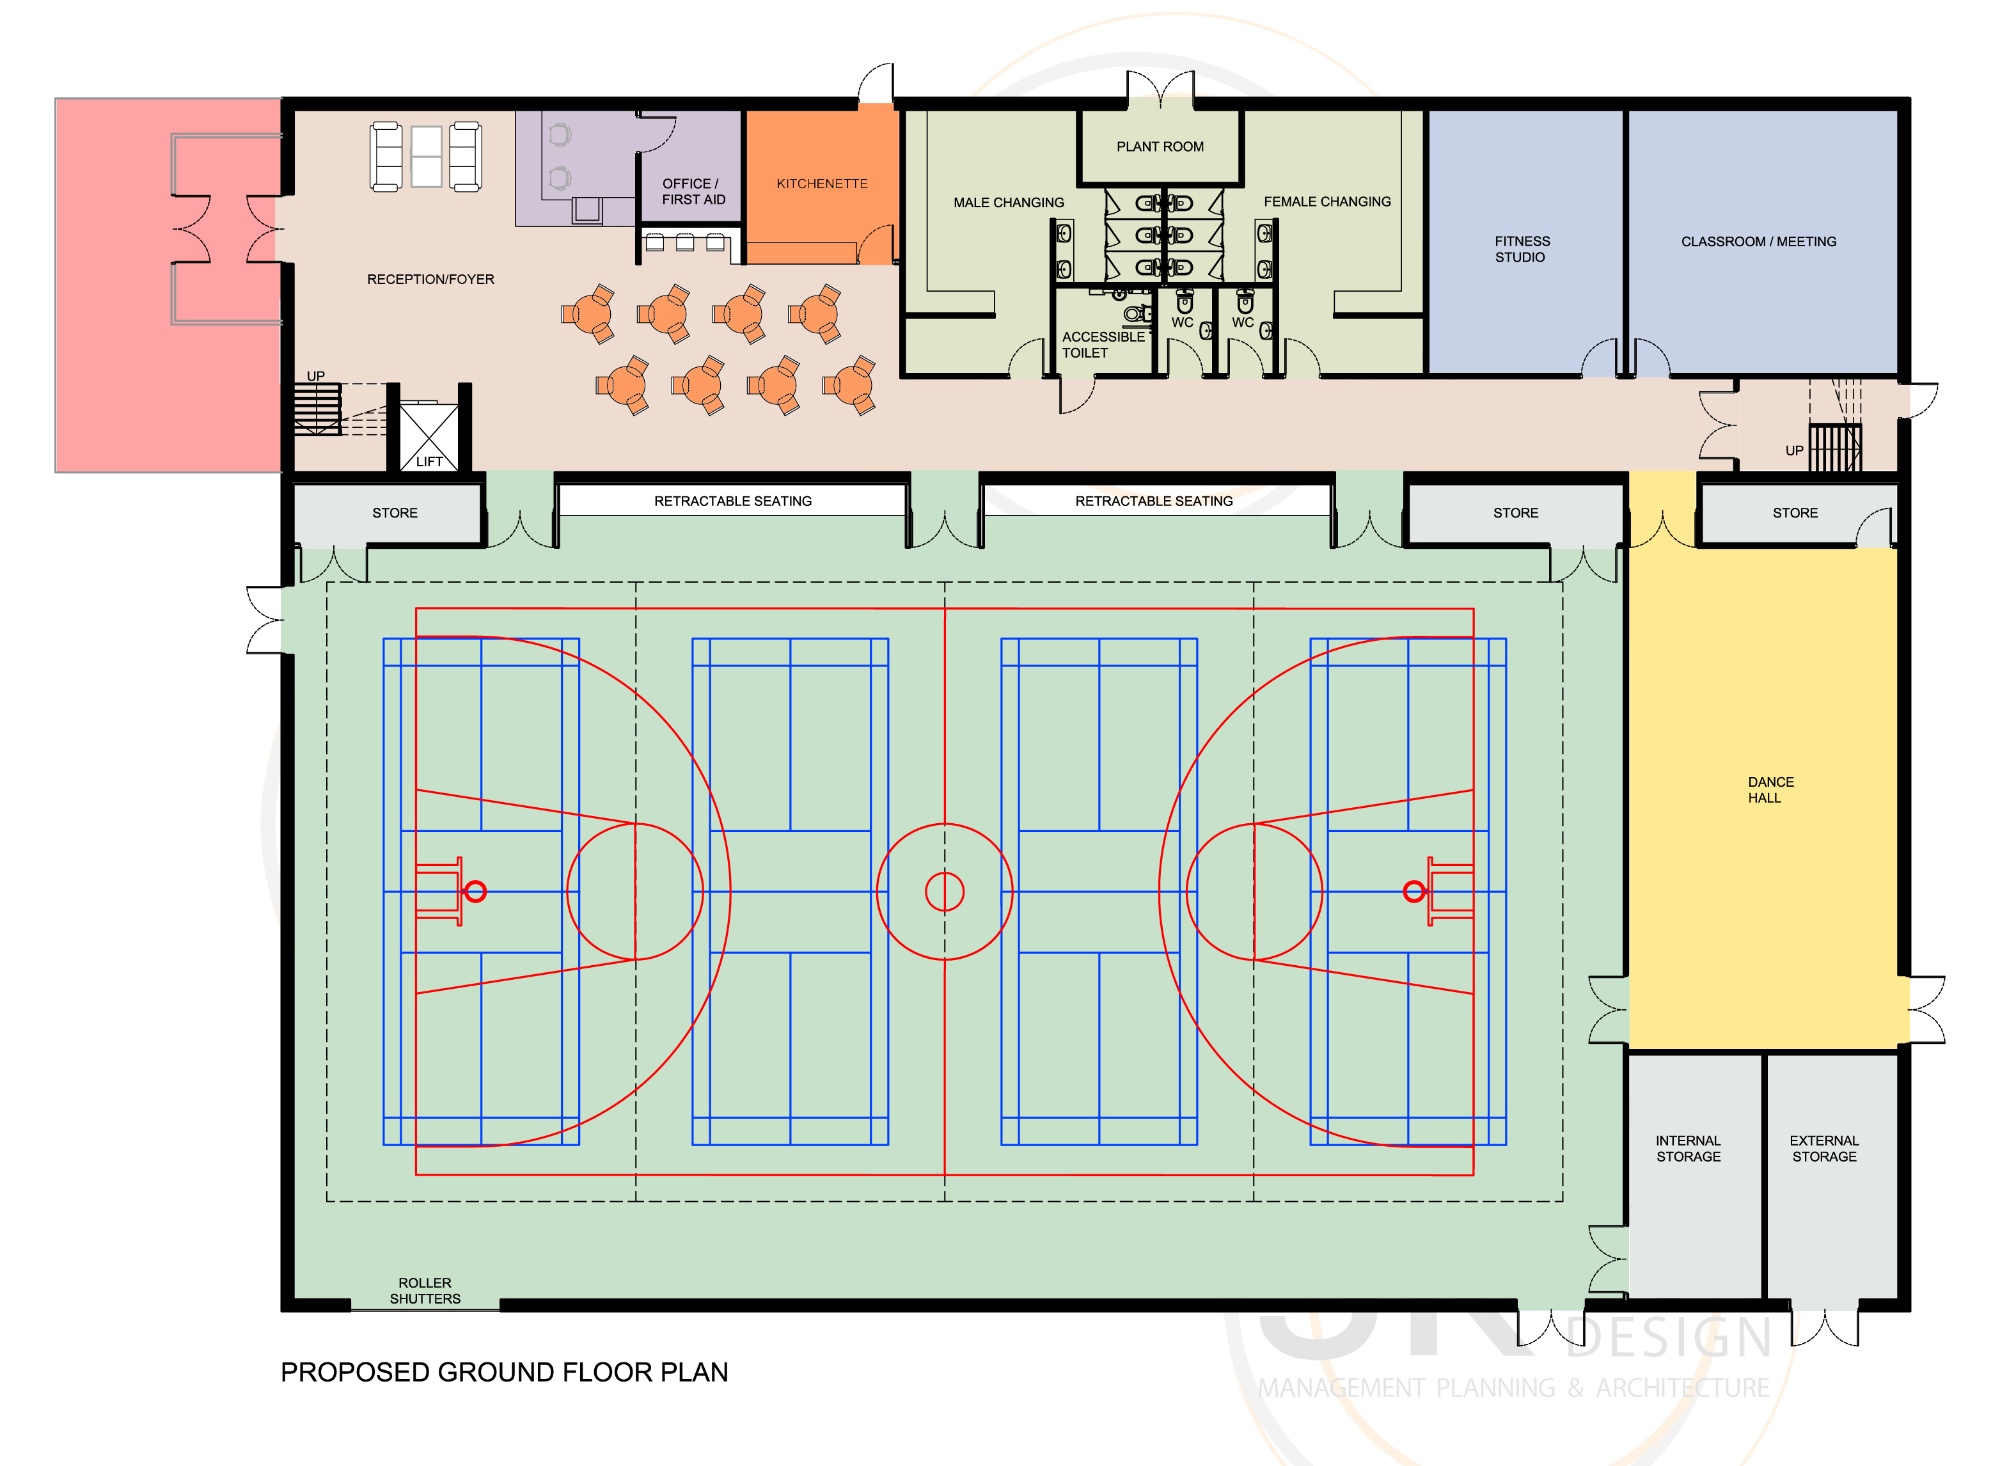 Ground floor plan of proposed sports hall